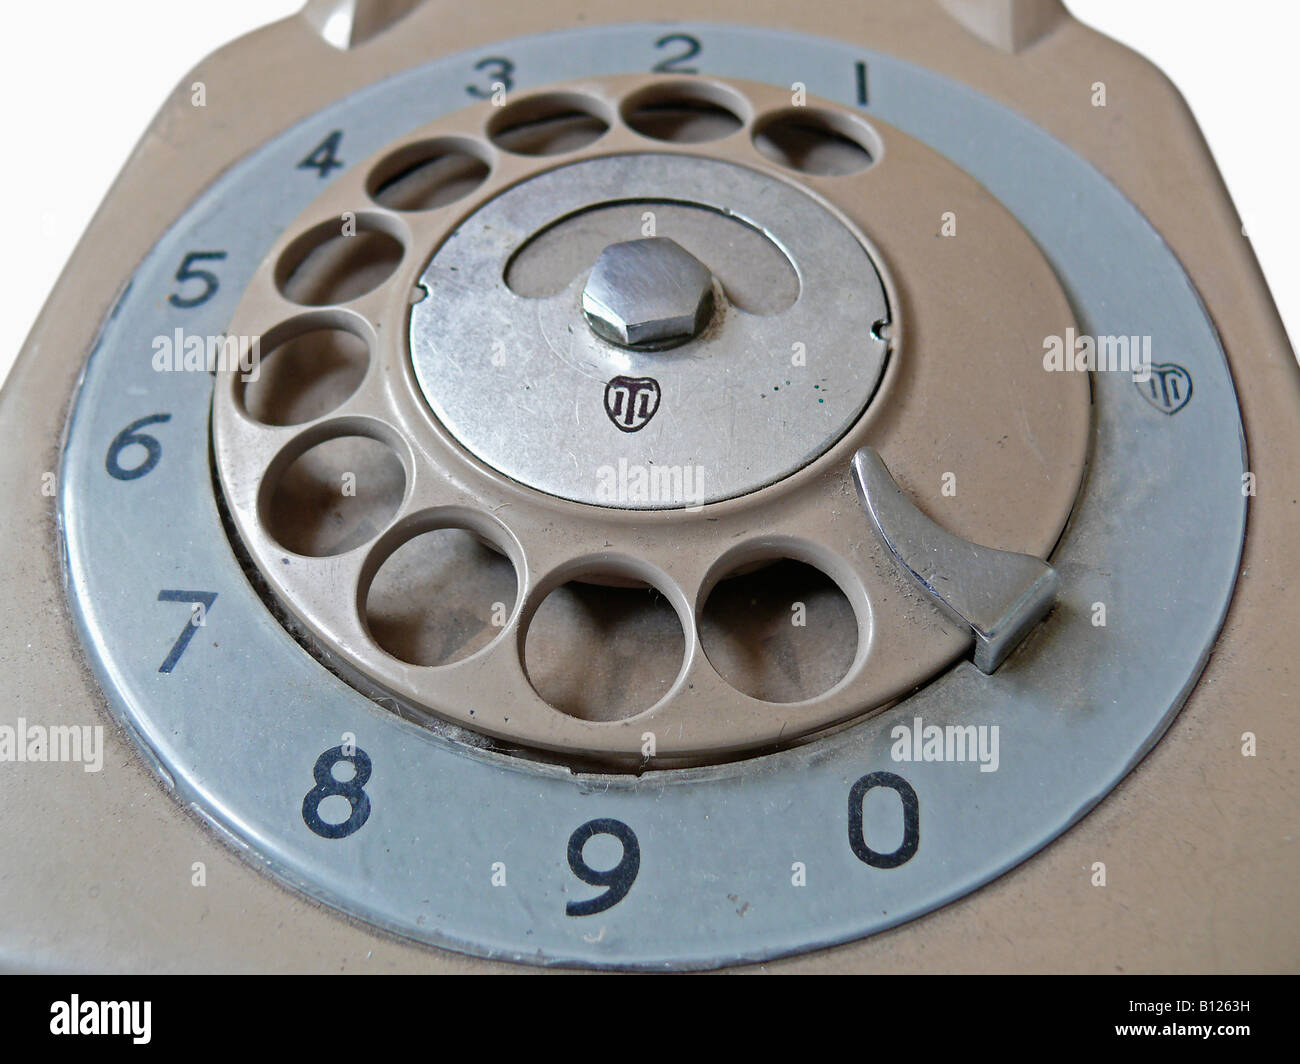 Grey telephone old fashioned dial Antique Stock Photo